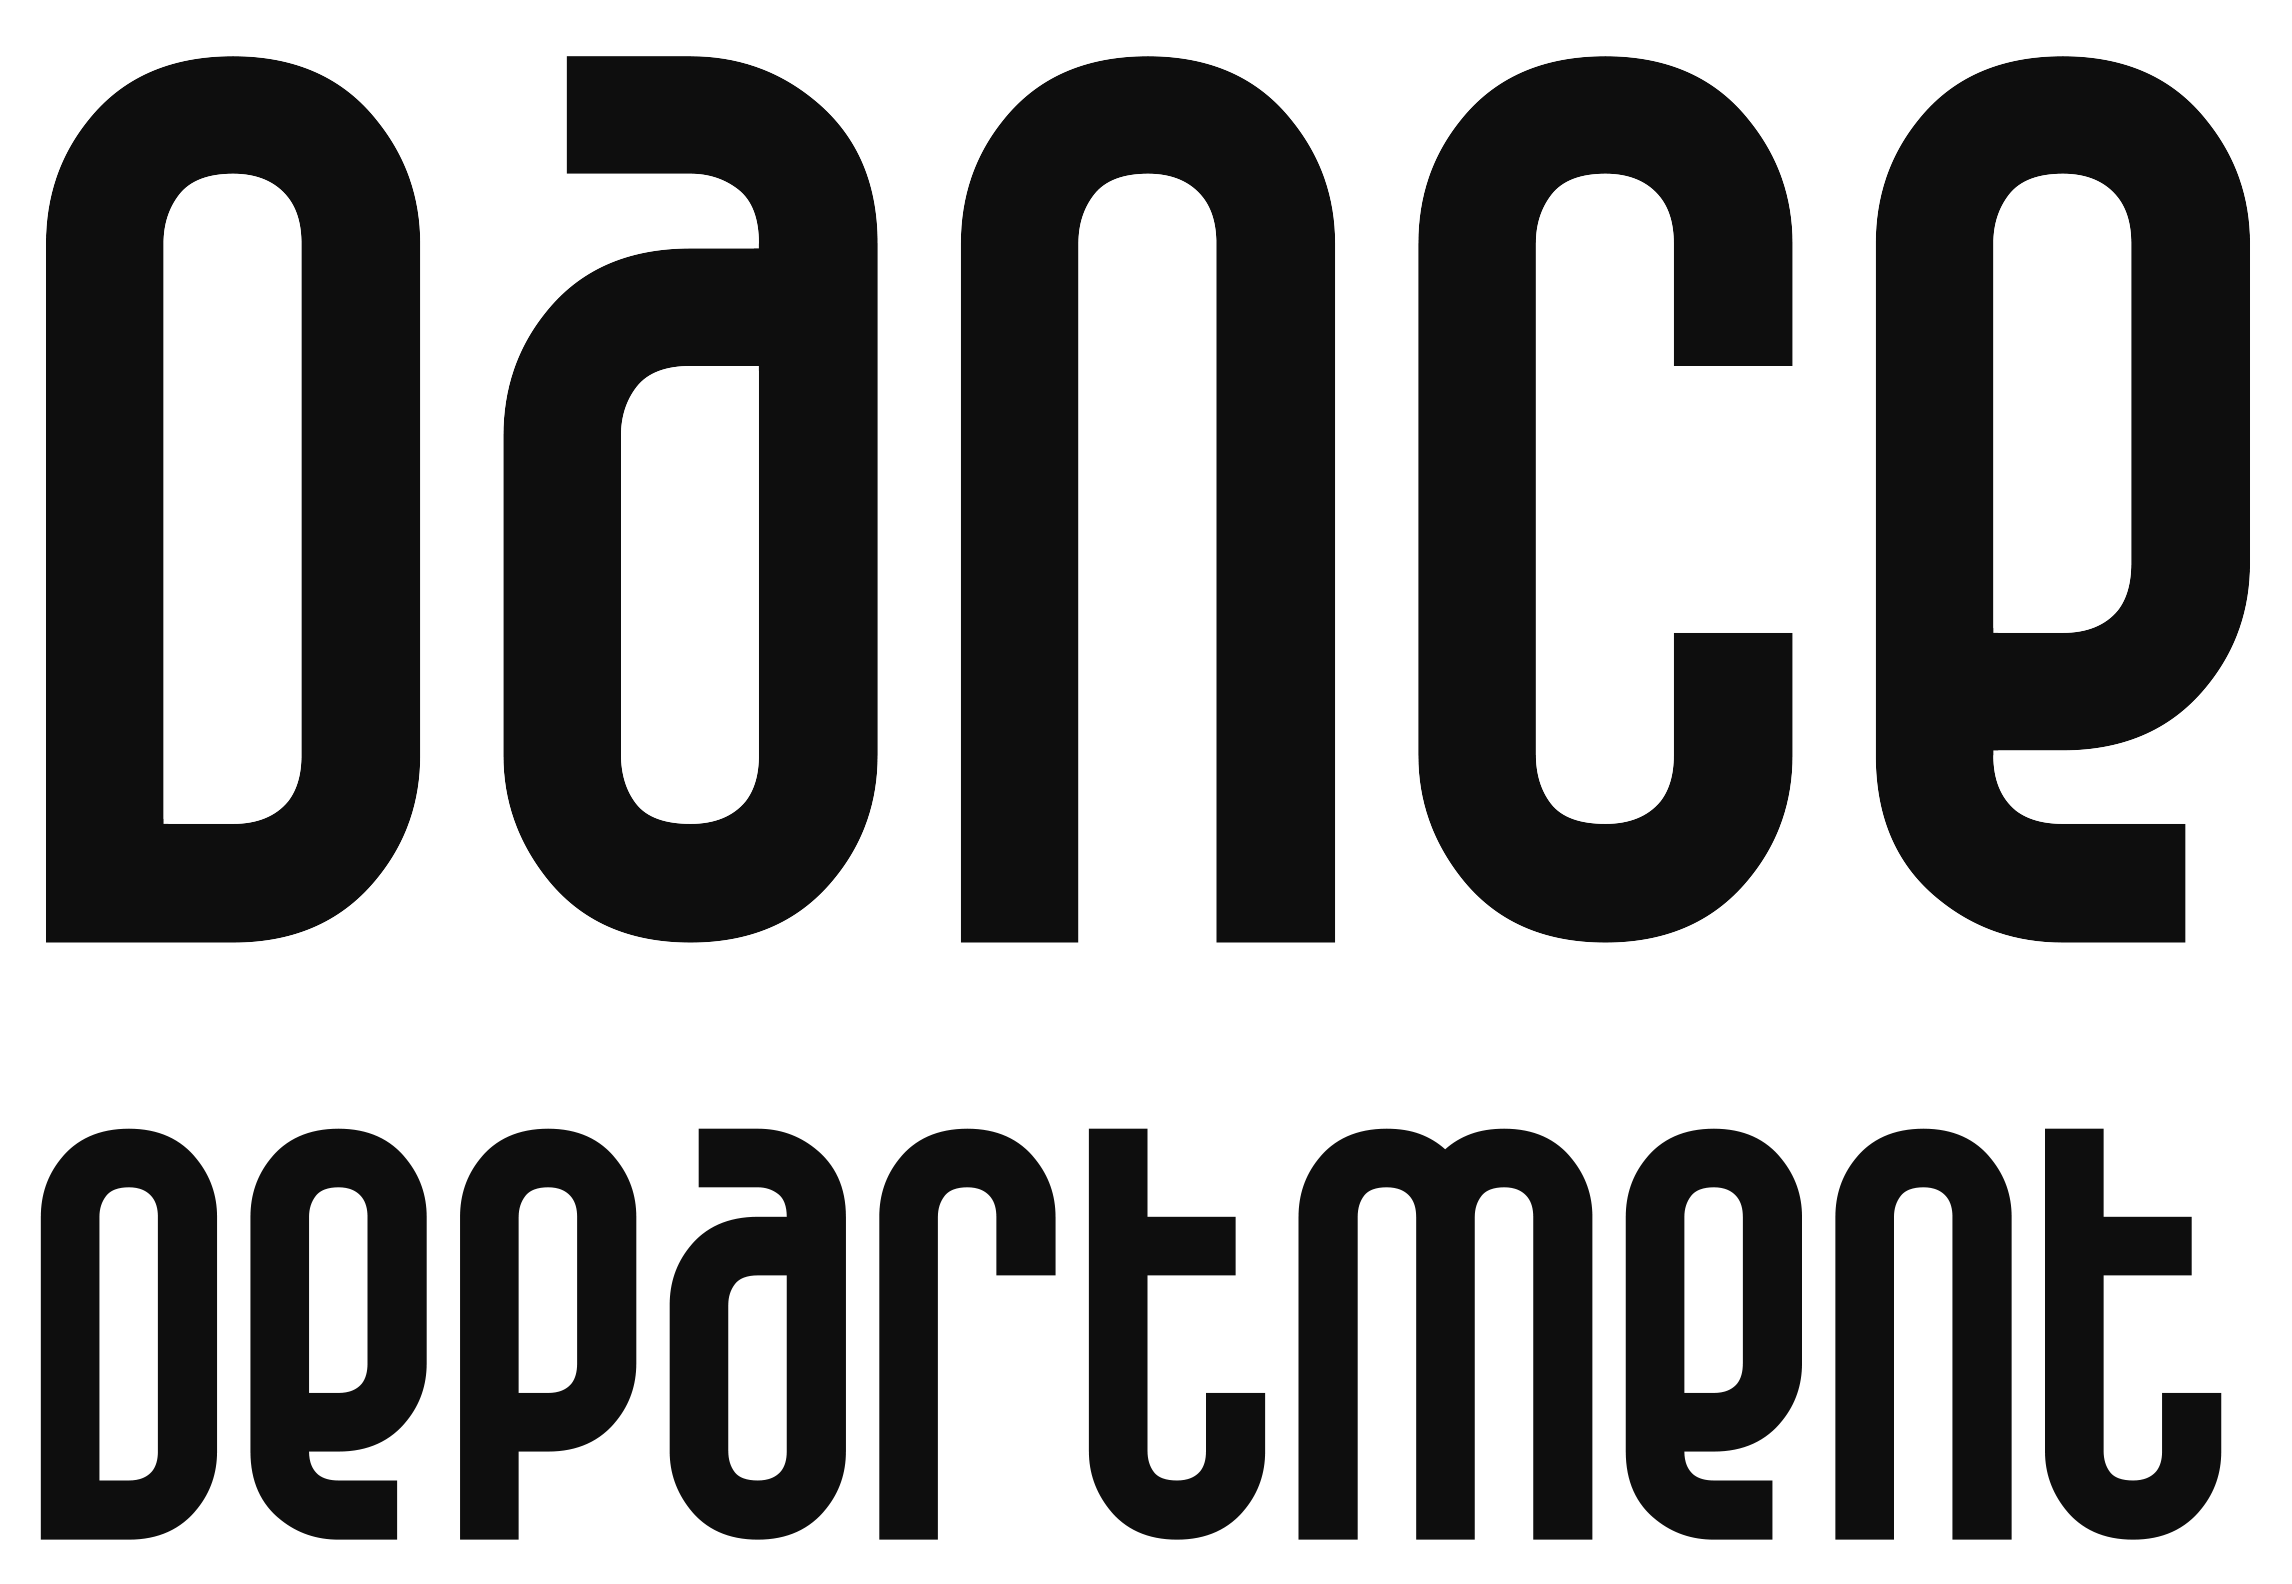 Dance Department by Magda